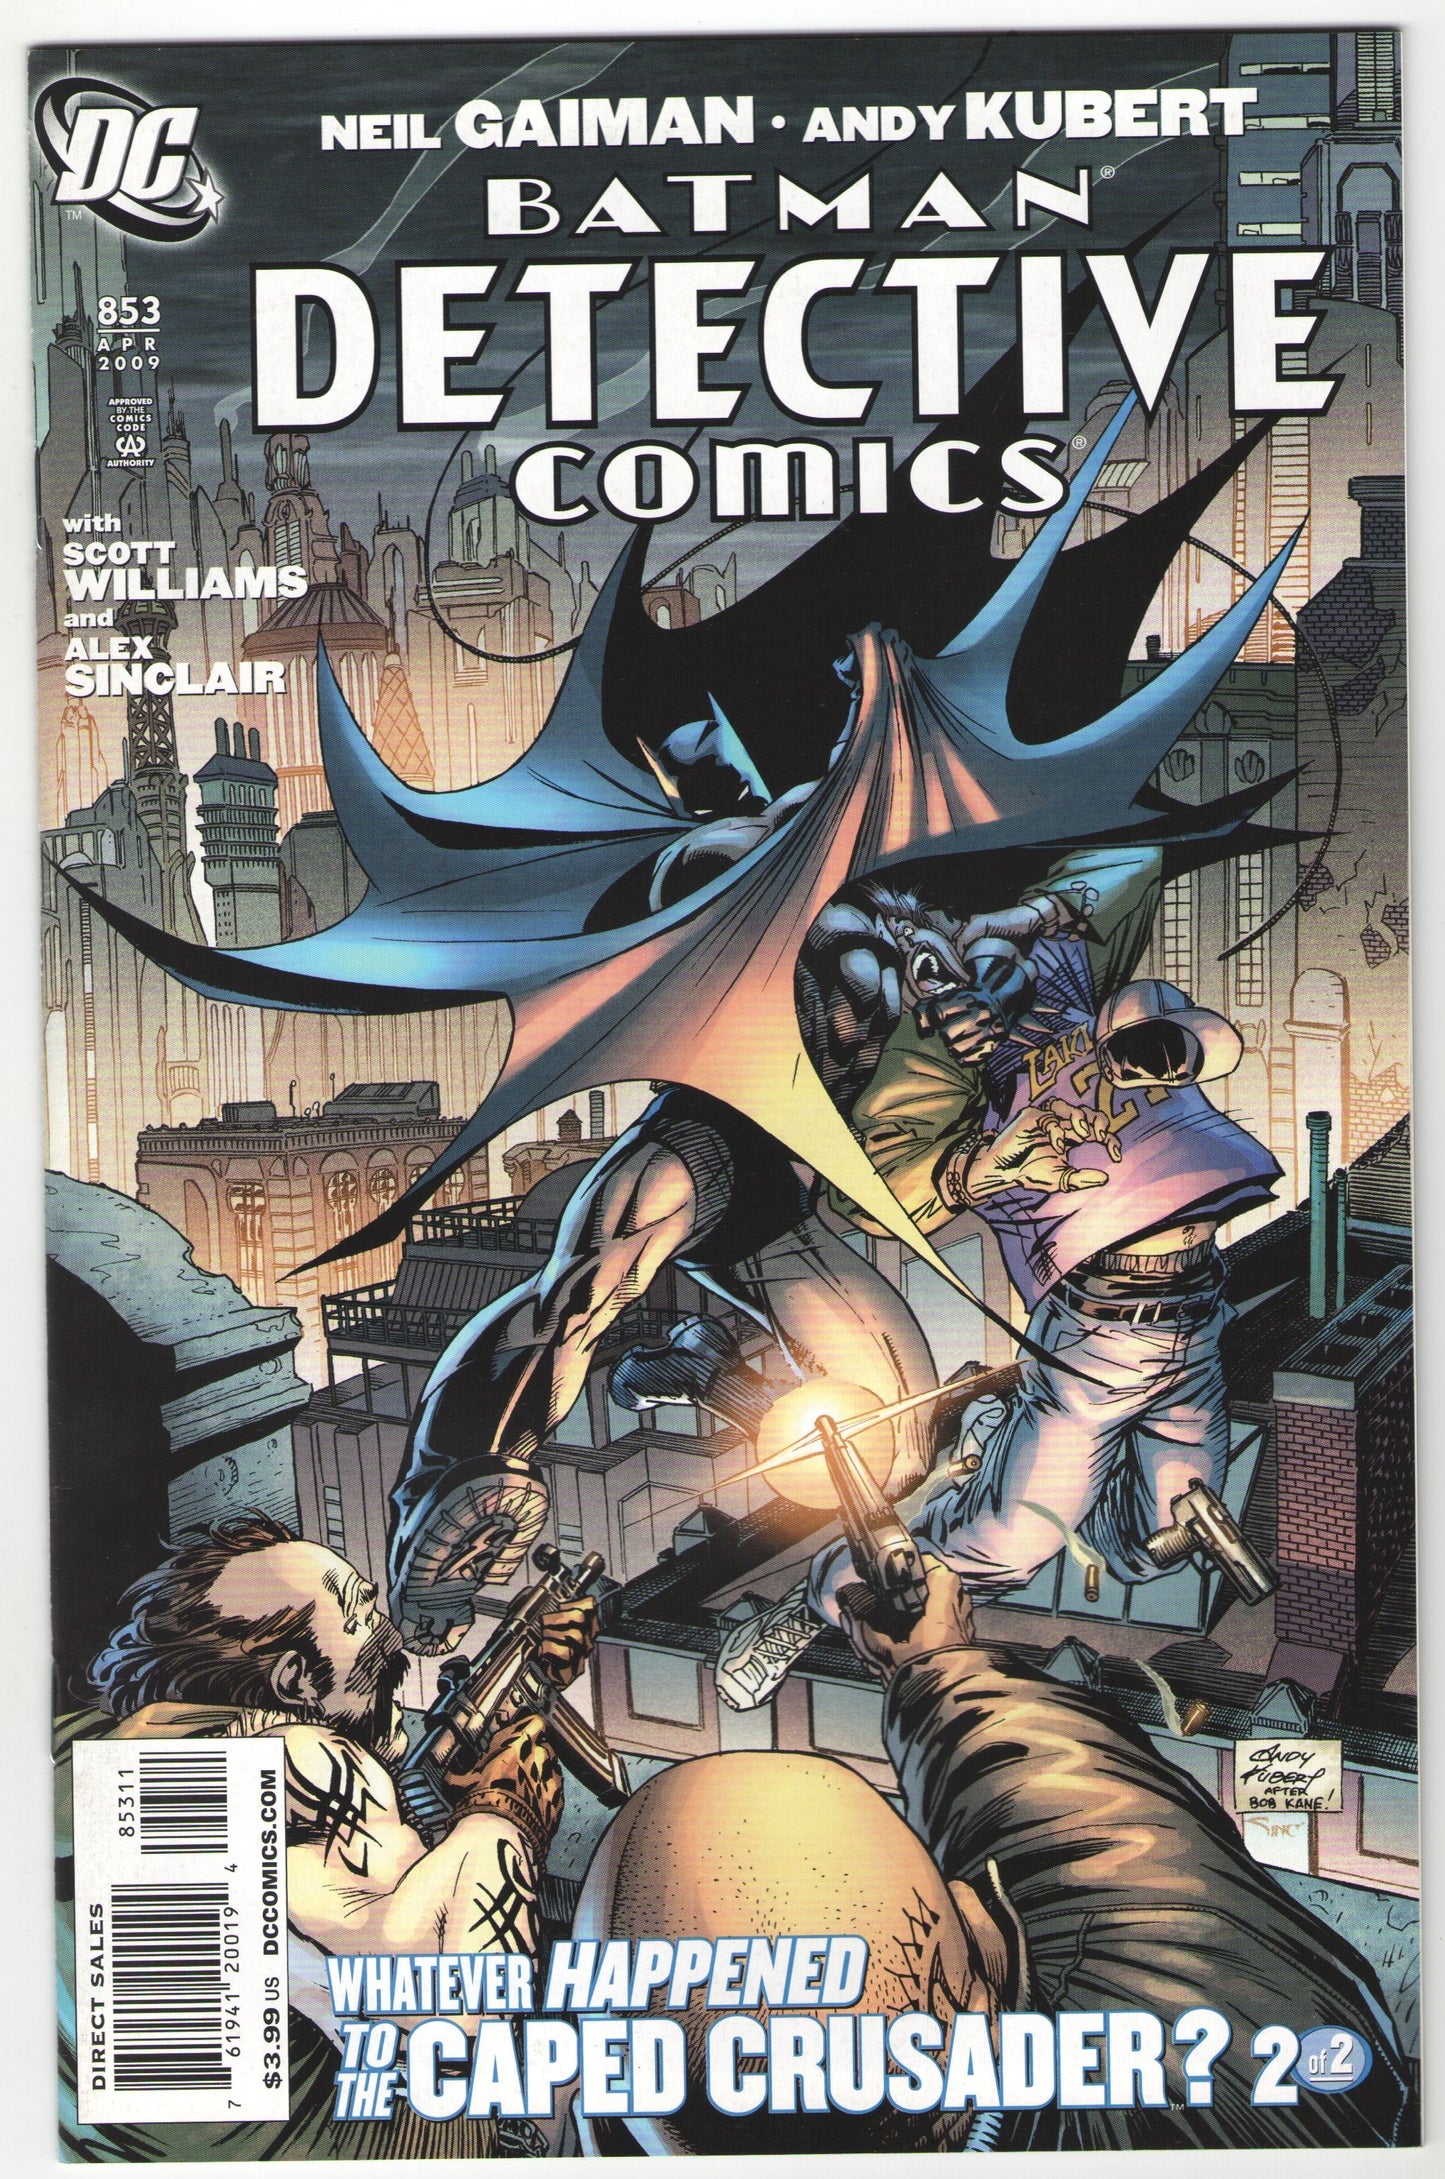 “Whatever Happened to the Caped Crusader?” Complete Story Arc (2009)